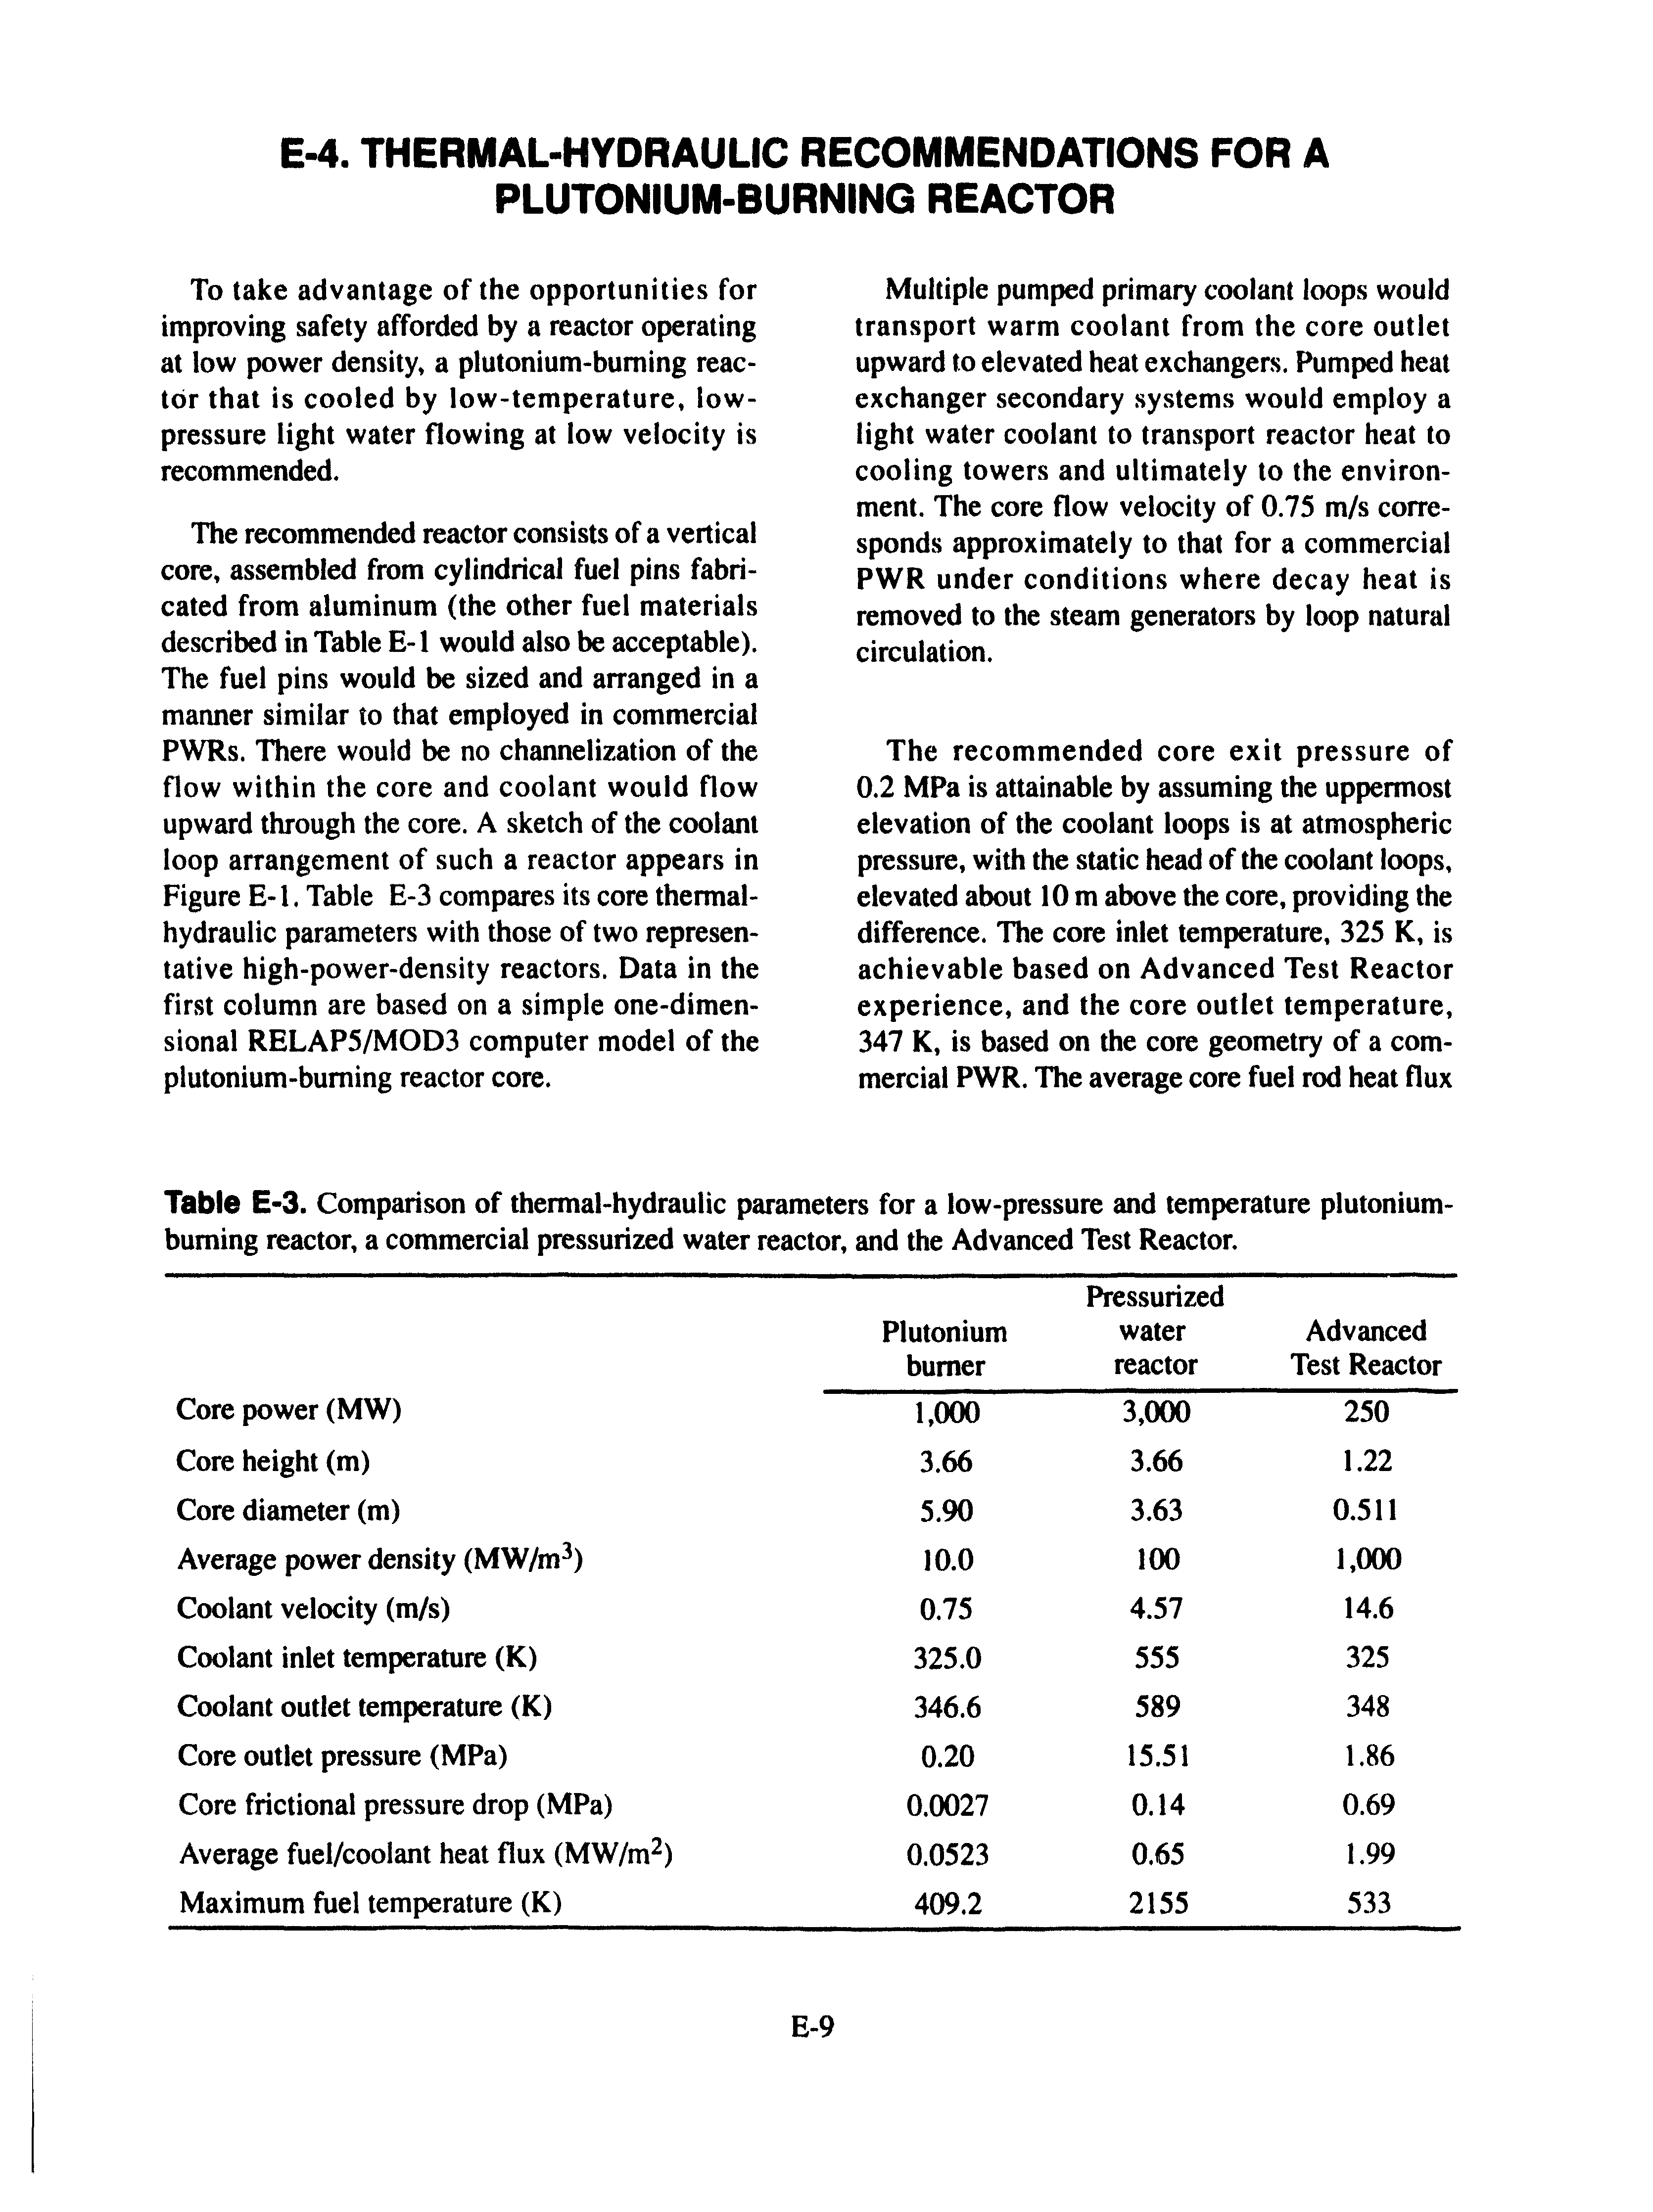 Table E-3. Comparison of thermal-hydraulic parameters for a low-pressure and temperature plutonium-burning reactor, a commercial pressurized water reactor, and the Advanced Test Reactor.